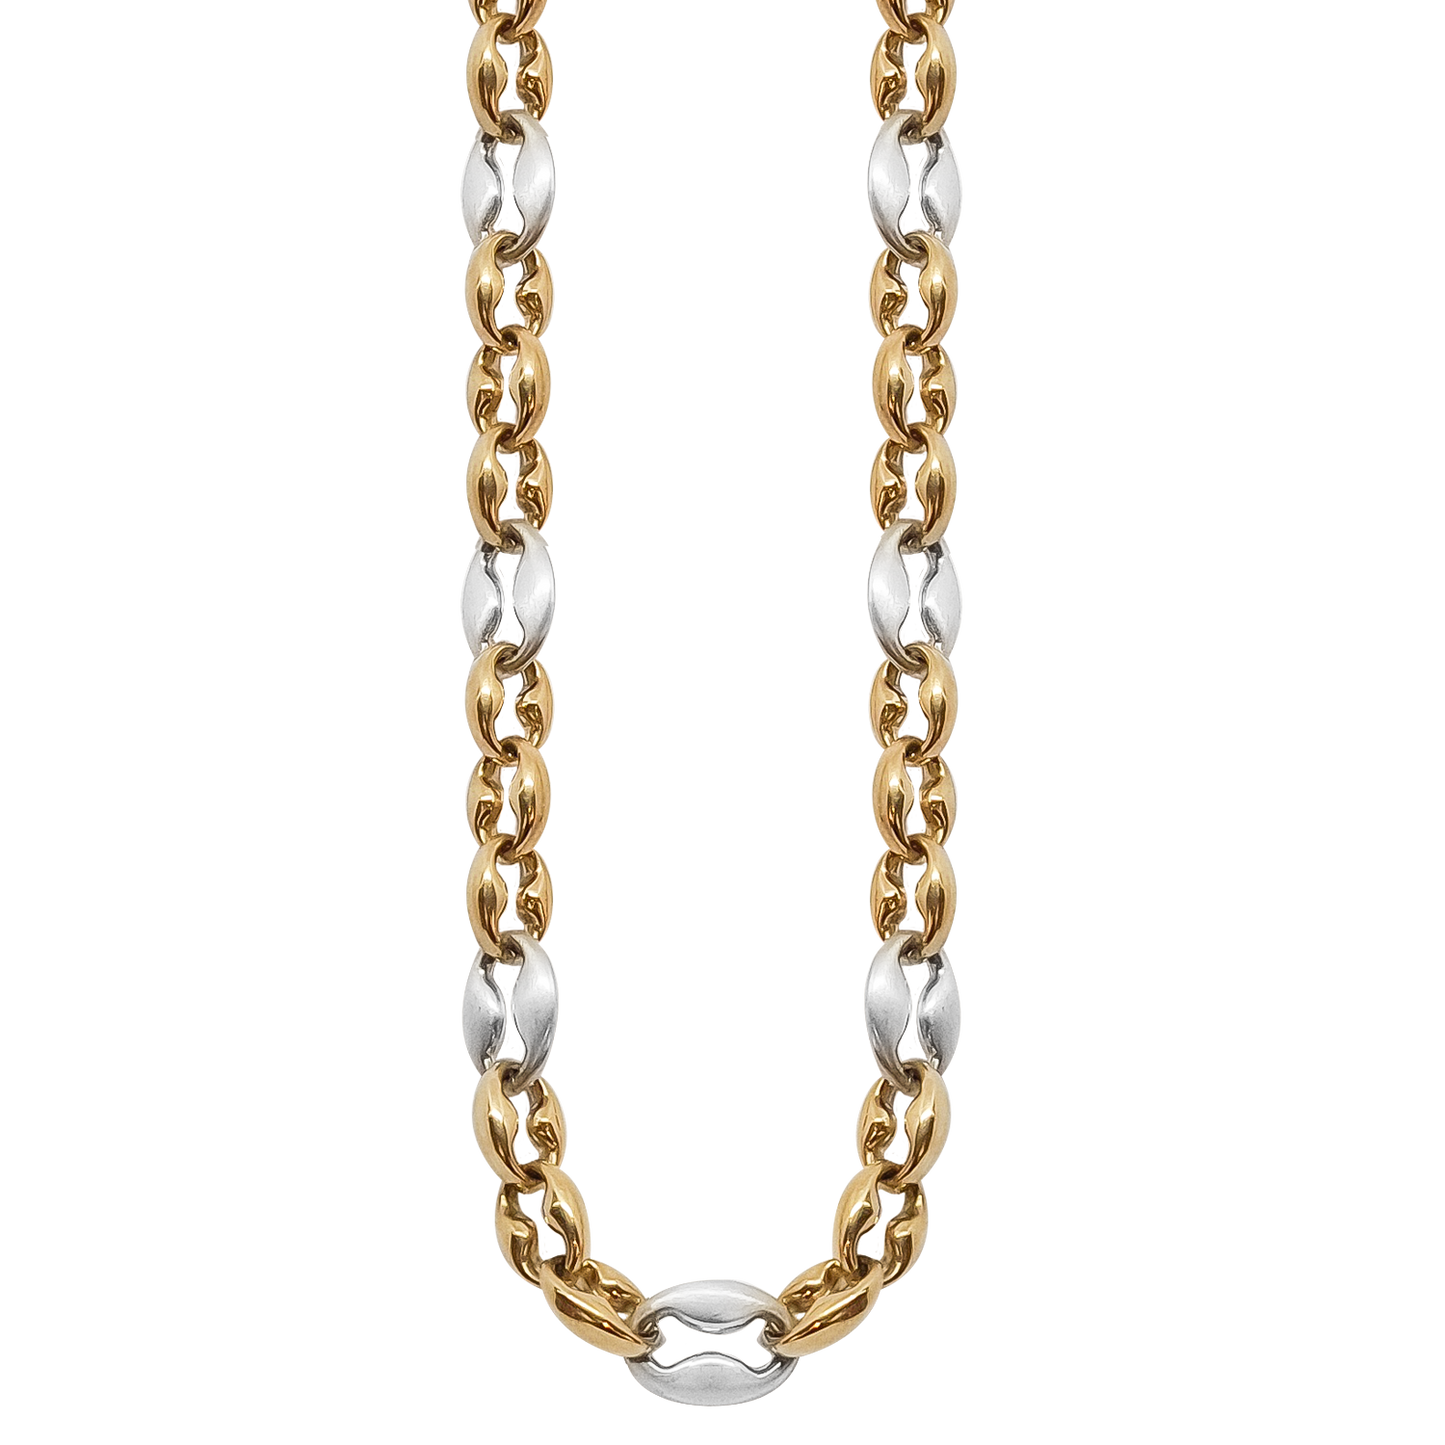 Two-tone mat and gloss Gucci Link Bracelet in 9ct Two-Tone Gold in hollow tubes for a lighter weight on your shoulders.